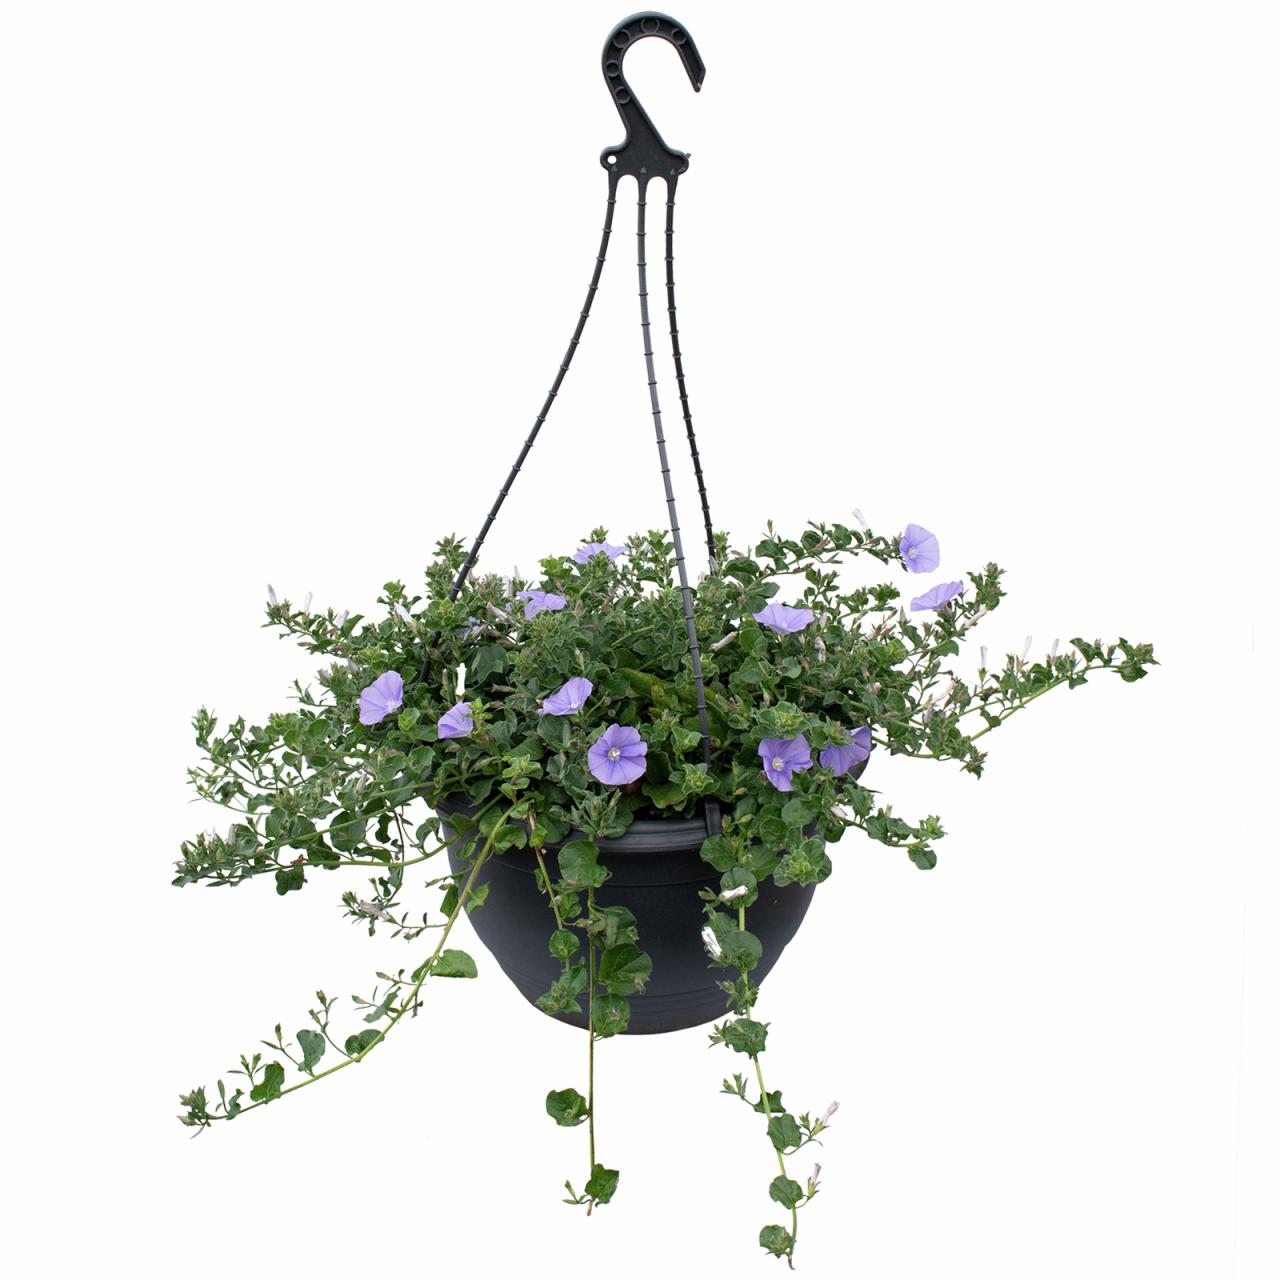 Hanging Plants Indoor | Discover the Art of Beautifying Spaces with Bunnings Hanging Plant Baskets